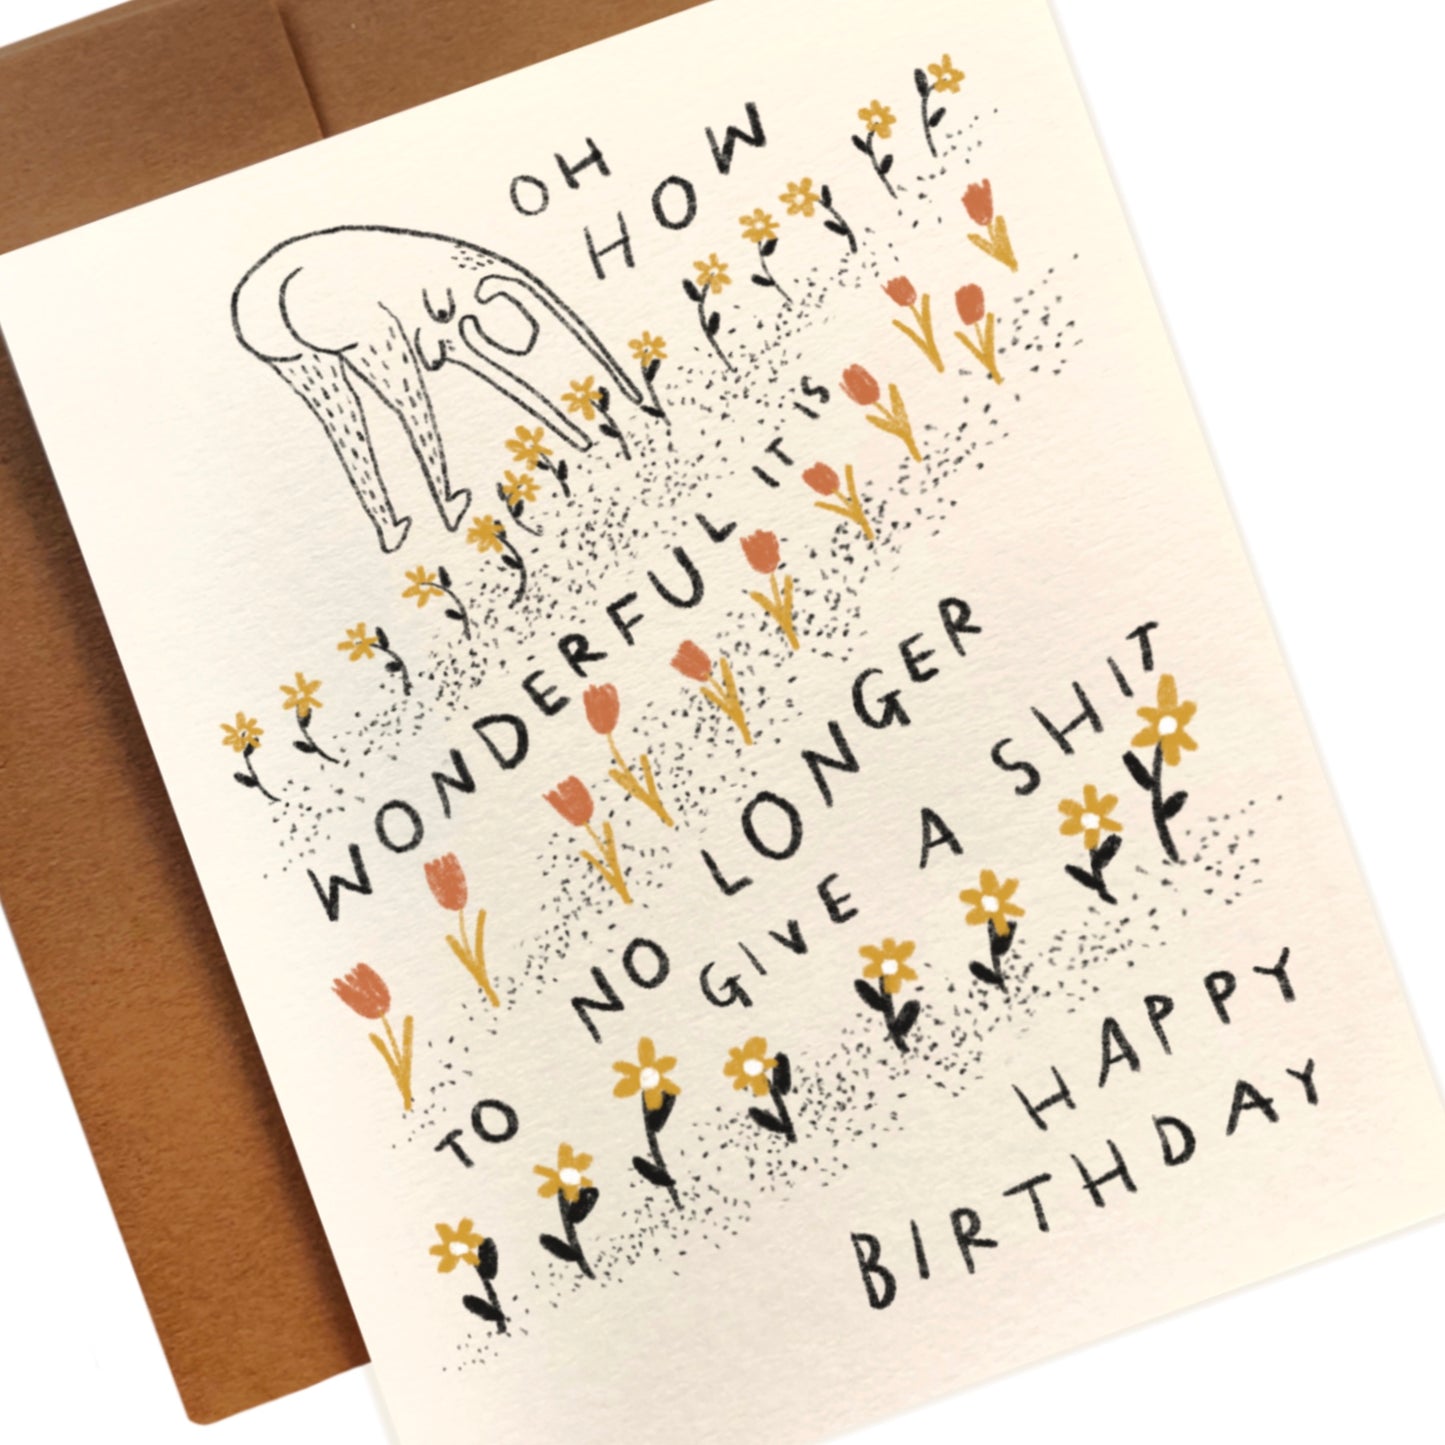 HOW WONDERFUL IT IS TO NO LONGER GIVE A SHIT Birthday Card